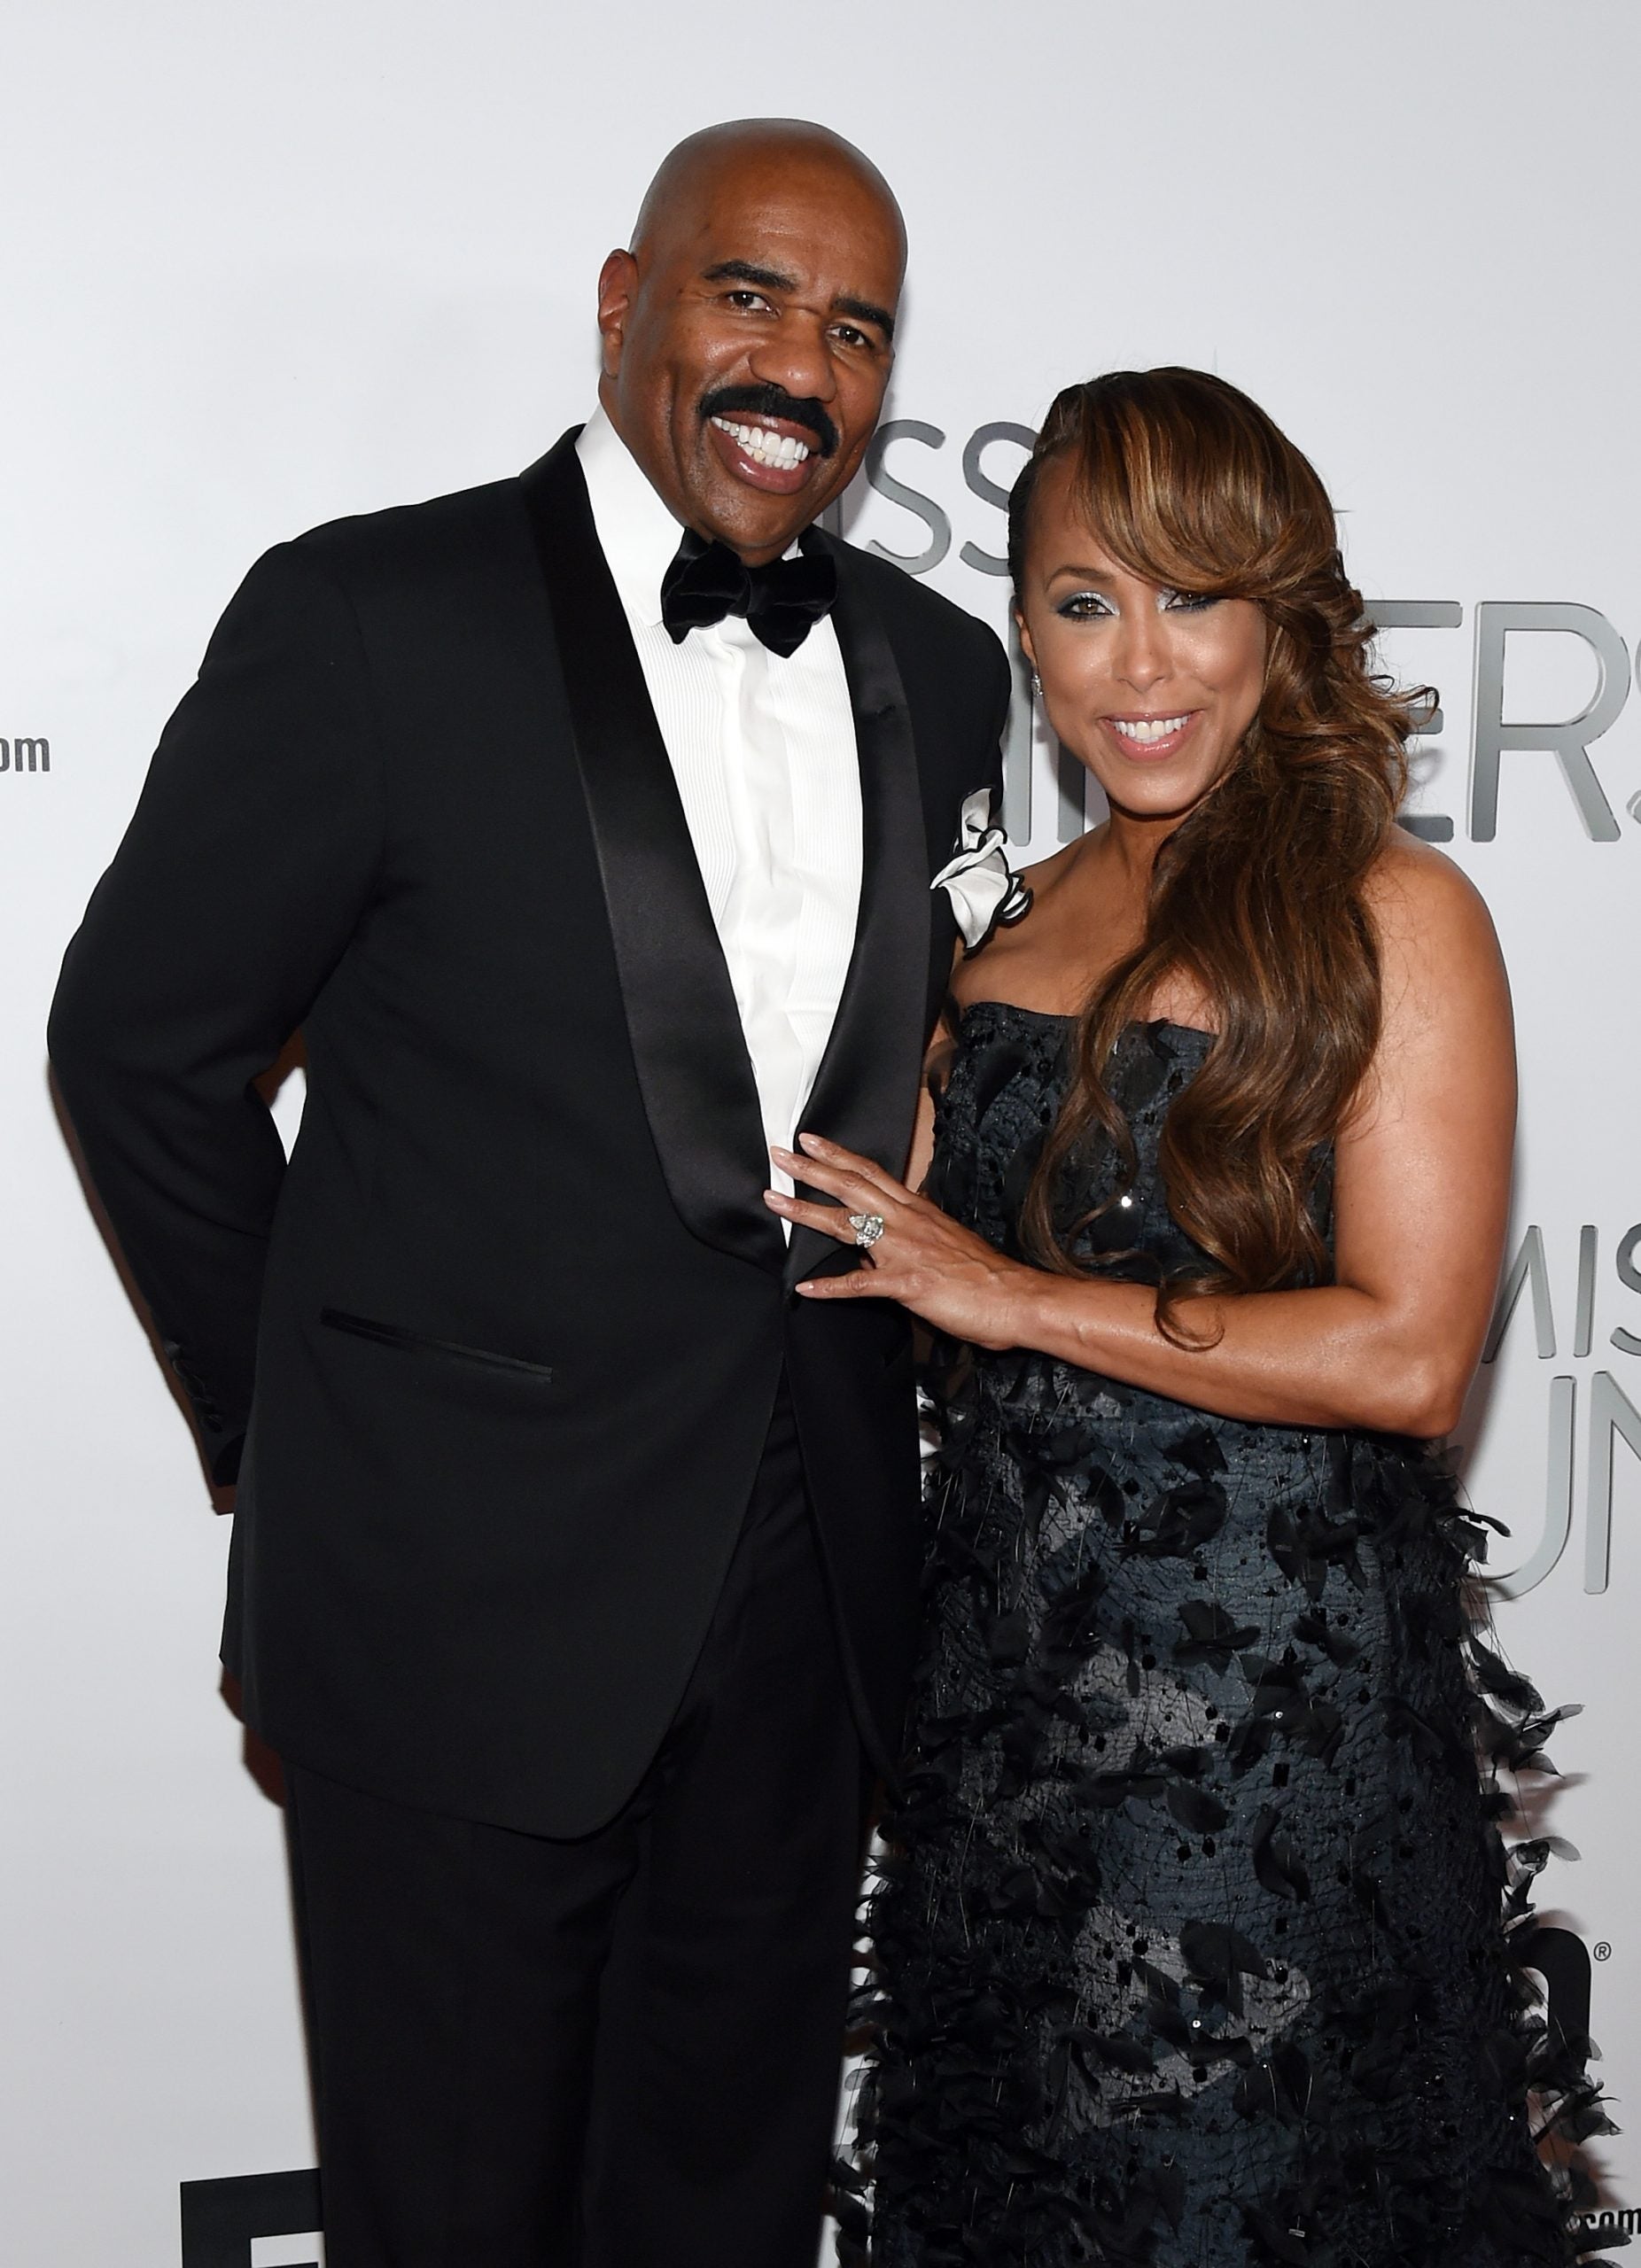 10 Celebrity Couples Who Keep It Real About The Ups and Downs Of Marriage